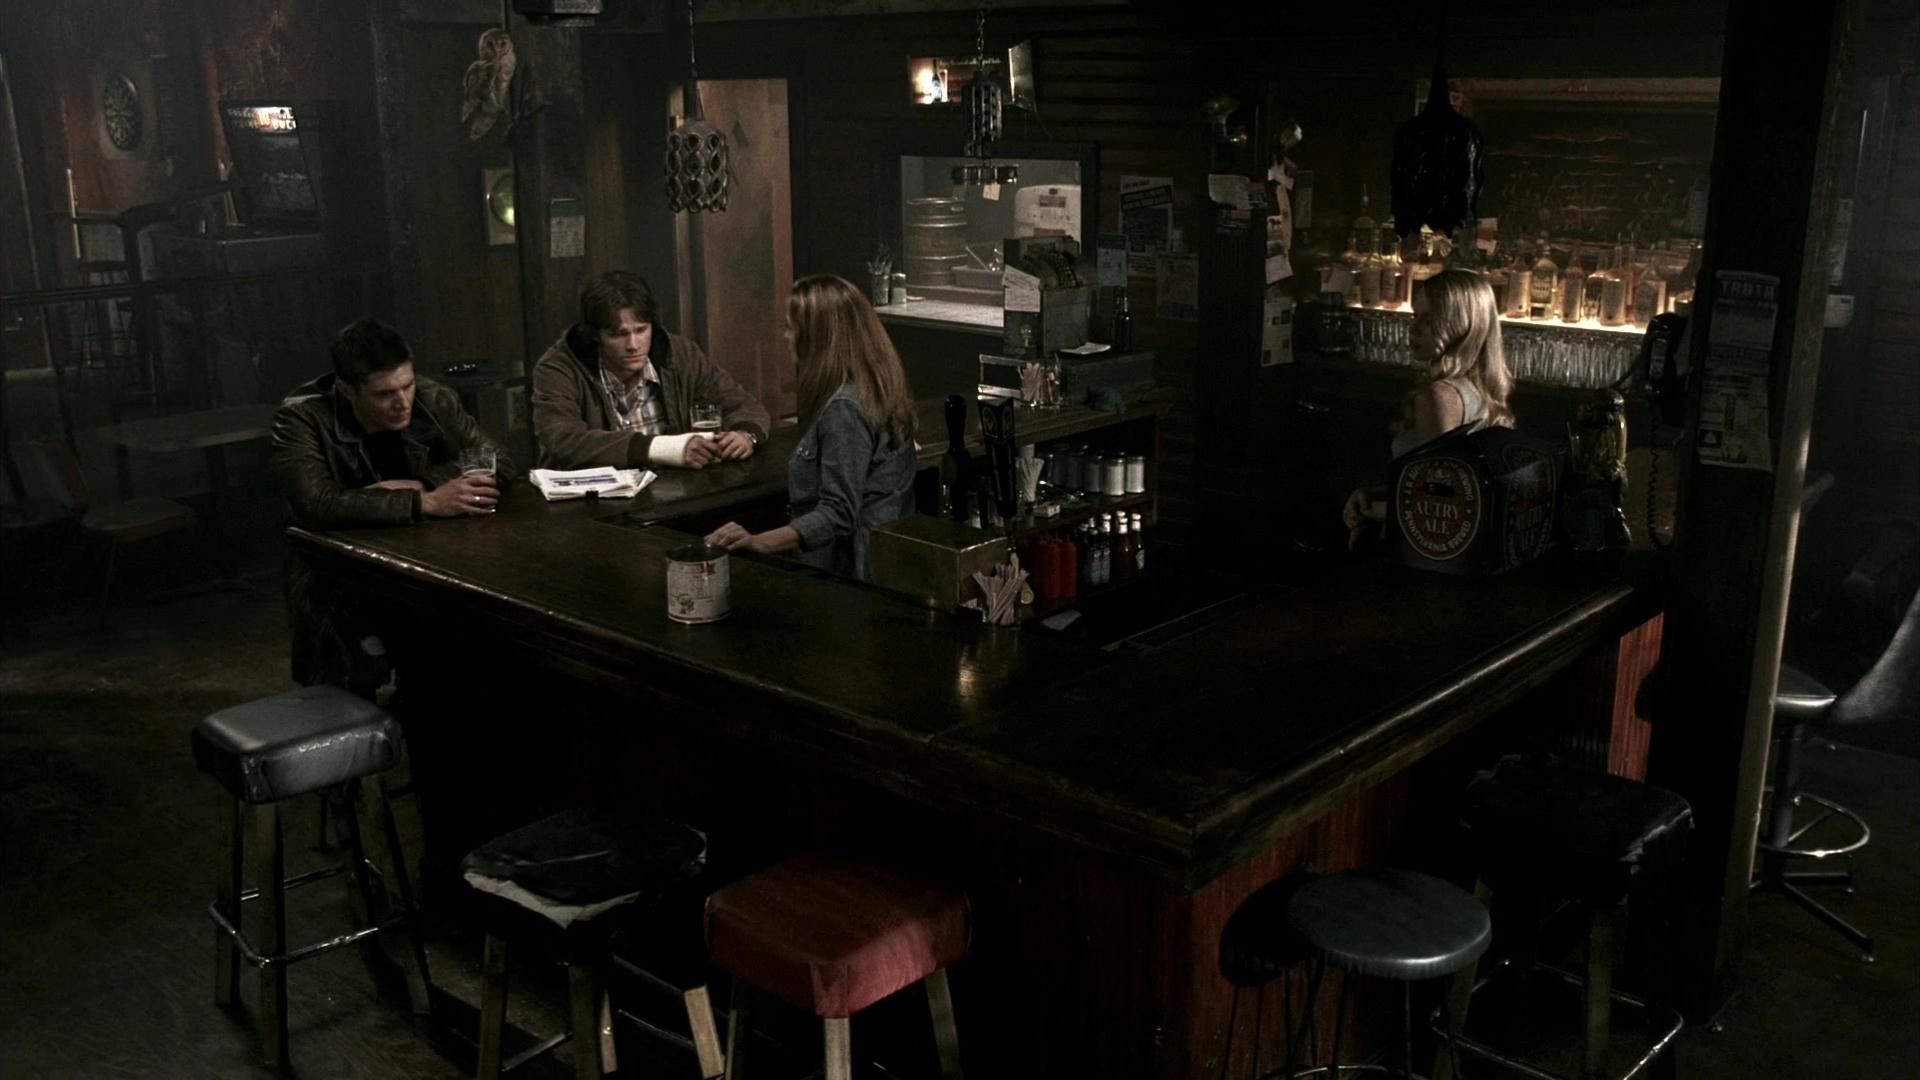 1920x1080 Category:Bars and Restaurants | Supernatural Wiki | FANDOM powered by Wikia